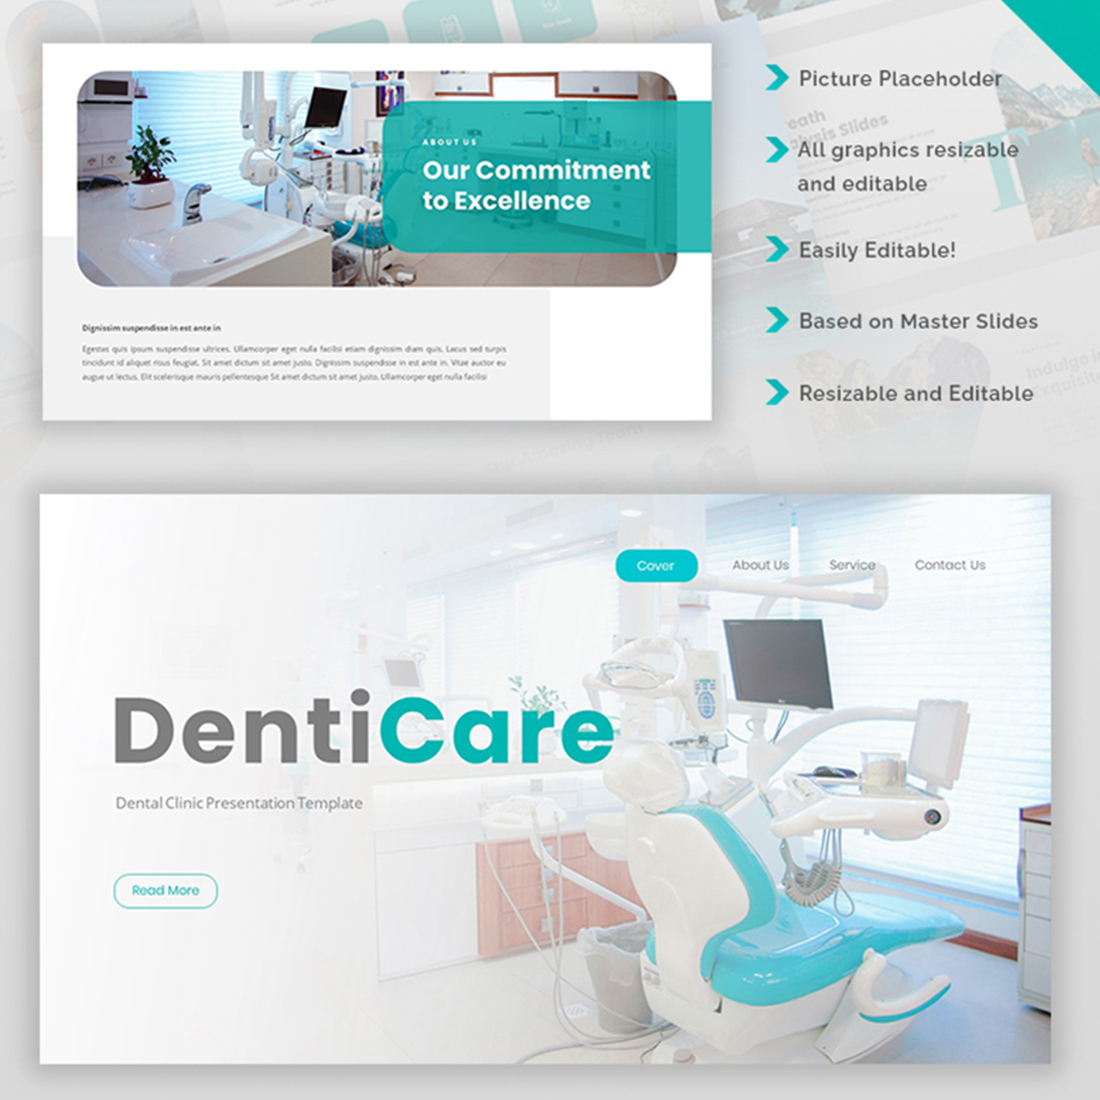 DentiCare-Dental Clinic Keynote Template preview image.